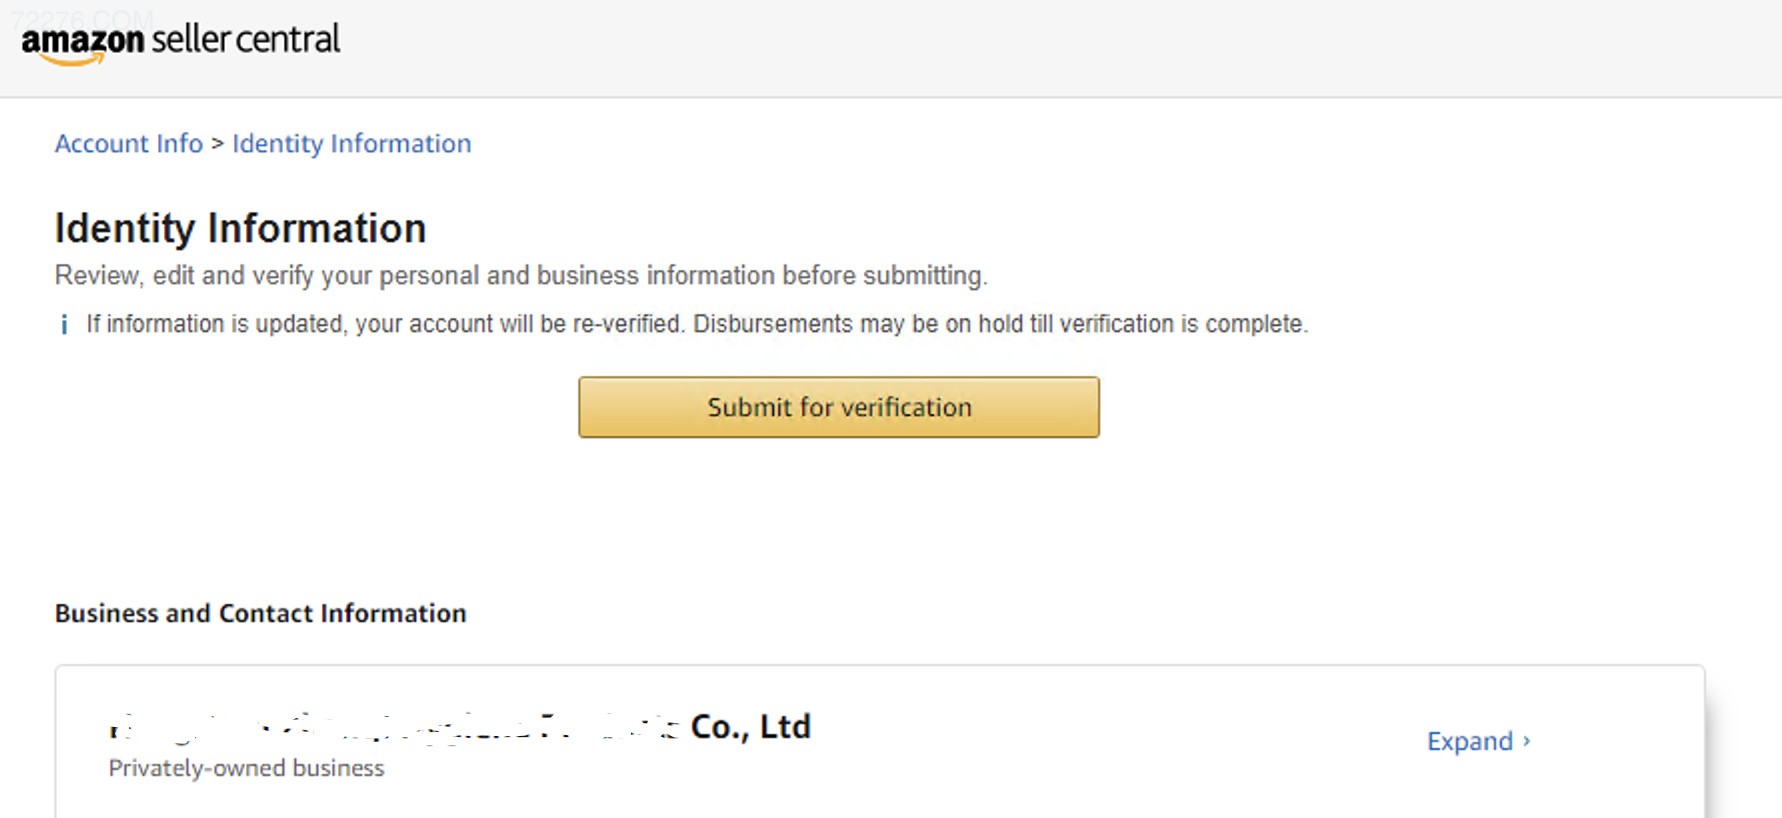 We need to do KYC again? - General Selling on Amazon Questions - Amazon Seller Forums